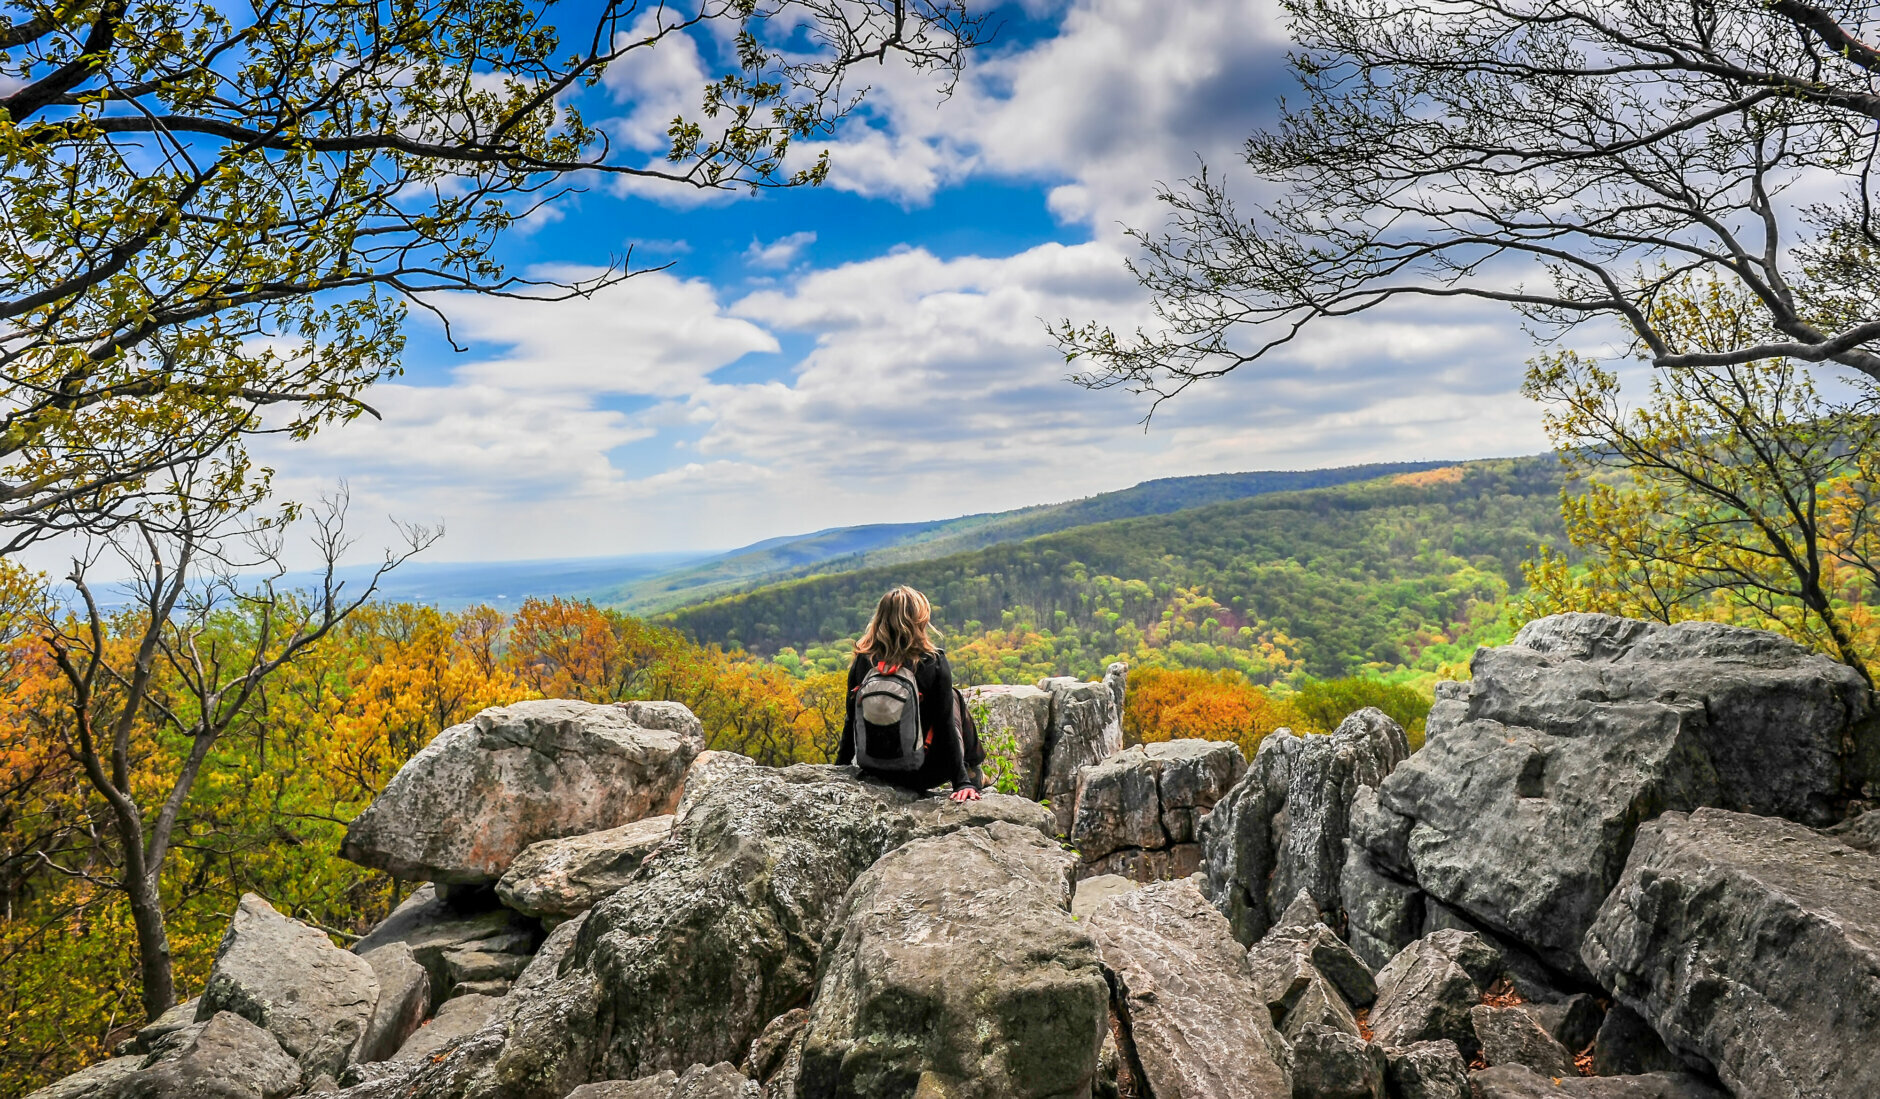 <h3>Hiking and leaf peeping</h3>
<p>The D.C. area is amazingly well stocked with beautiful trails that offer easy strolls and more challenging hikes.</p>
<p>With falling temperatures and the soon-to-change foliage, getting out for a hike is great option that carries a low risk of infection.</p>
<p>Here are just a few good options nearby:</p>
<h3>Annapolis Rock</h3>
<p>Tucked away in South Mountain State Park, in Maryland, Annapolis Rock is a good day hike at slightly over five miles.</p>
<p>Along the way, you&#8217;ll be treated to stunning views of Greenbrier Lake and Black Rock Cliff.</p>
<p>The trail is popular among hikers, so bring a mask out on the trail in case it begins to get crowded.</p>
<h3>Shenandoah National Park</h3>
<p>Located just over an hour outside the District, Shenandoah National Park is a perfect option for those who want to catch sight of the changing leaves.</p>
<p>Whether you hop on one of the many trail heads, pull off the road for a scenic overlook or cruise the 105 miles of Skyline Drive, Shenandoah has a little something for all nature lovers.</p>
<p>Keep in mind that some of the trails can get crowded at times, so be aware of your surroundings and bring a mask just in case.</p>
<p><strong>Popular trails:</strong></p>
<ul>
<li><a href="https://www.alltrails.com/trail/us/virginia/old-rag-mountain-loop-trail?ref=result-card" target="_blank" rel="noopener">Old Rag Mountain Loop</a></li>
<li><a href="https://www.alltrails.com/trail/us/virginia/dark-hollow-falls-trail?ref=result-card" target="_blank" rel="noopener">Dark Hollow Falls Trail</a></li>
<li><a href="https://www.alltrails.com/trail/us/virginia/hawksbill-gap-loop?ref=result-card" target="_blank" rel="noopener">Hawksbill Gap Loop</a></li>
<li><a href="https://www.alltrails.com/trail/us/virginia/stony-man-via-appalachian-trail?ref=result-card" target="_blank" rel="noopener">Stony Man</a></li>
</ul>
<p>For those seeking a sunset views, many of the pullouts and overlooks that face west offer stunning views of the nearby towns and valley, as well as the Shenandoah River, that complement an autumn sunset nicely.</p>
<h3>C&amp;O Canal</h3>
<p>The Chesapeake &amp; Ohio Canal runs more than 184 miles from D.C. to Cumberland, Maryland.</p>
<p>Hiking and biking along the trail is relatively easy, as it mostly follows the canal itself on fairly flat ground.</p>
<p>Those looking for a more adventurous experience can seek out the Billy Goat Trail for some rock scrambling and Potomac River views. Use caution out there, as a misstep can lead to serious injury &#8212; just ask <a href="https://wtop.com/montgomery-county/2020/09/potomac-river-safety-priority-for-montgomery-co-authorities-this-labor-day-weekend/" target="_blank" rel="noopener">Montgomery County Fire and Rescue,</a> who handle many of the emergency calls out there.</p>
<p>Great Falls is also worth a stop &#8212; viewable from either the Maryland or Virginia side of the river. Again, this area gets crowded, so bring a mask.</p>
